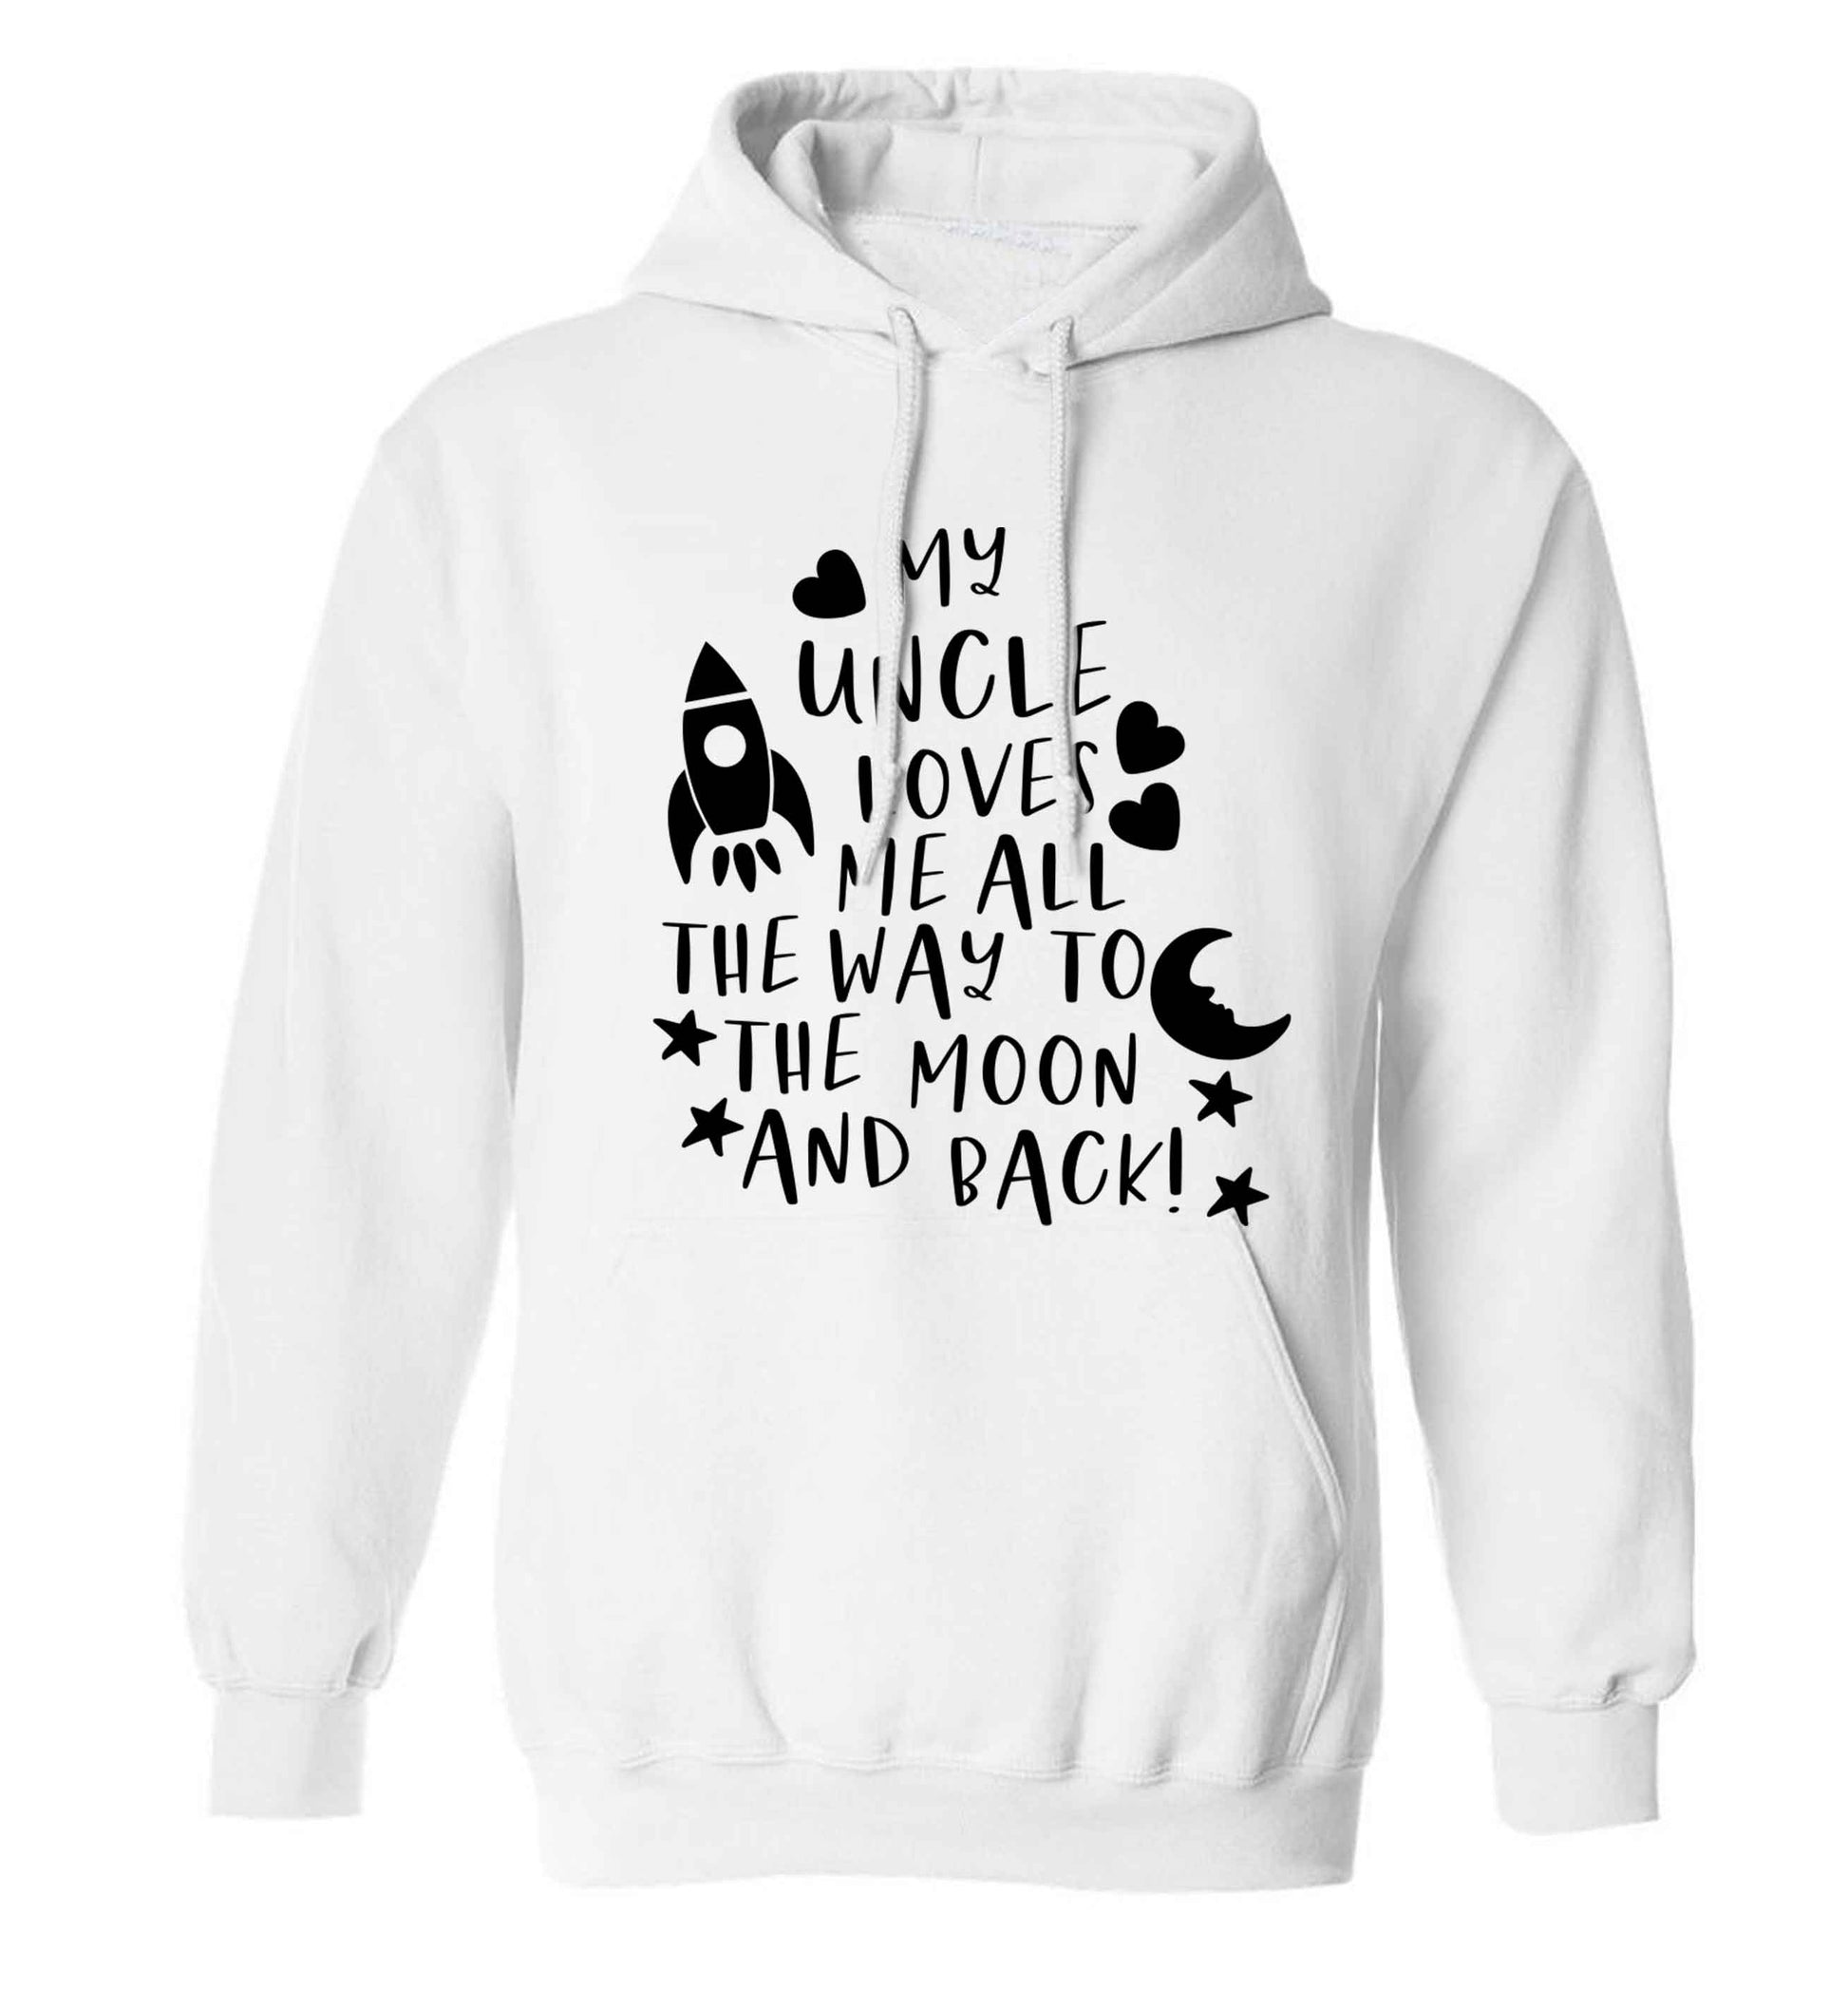 My uncle loves me all the way to the moon and back adults unisex white hoodie 2XL